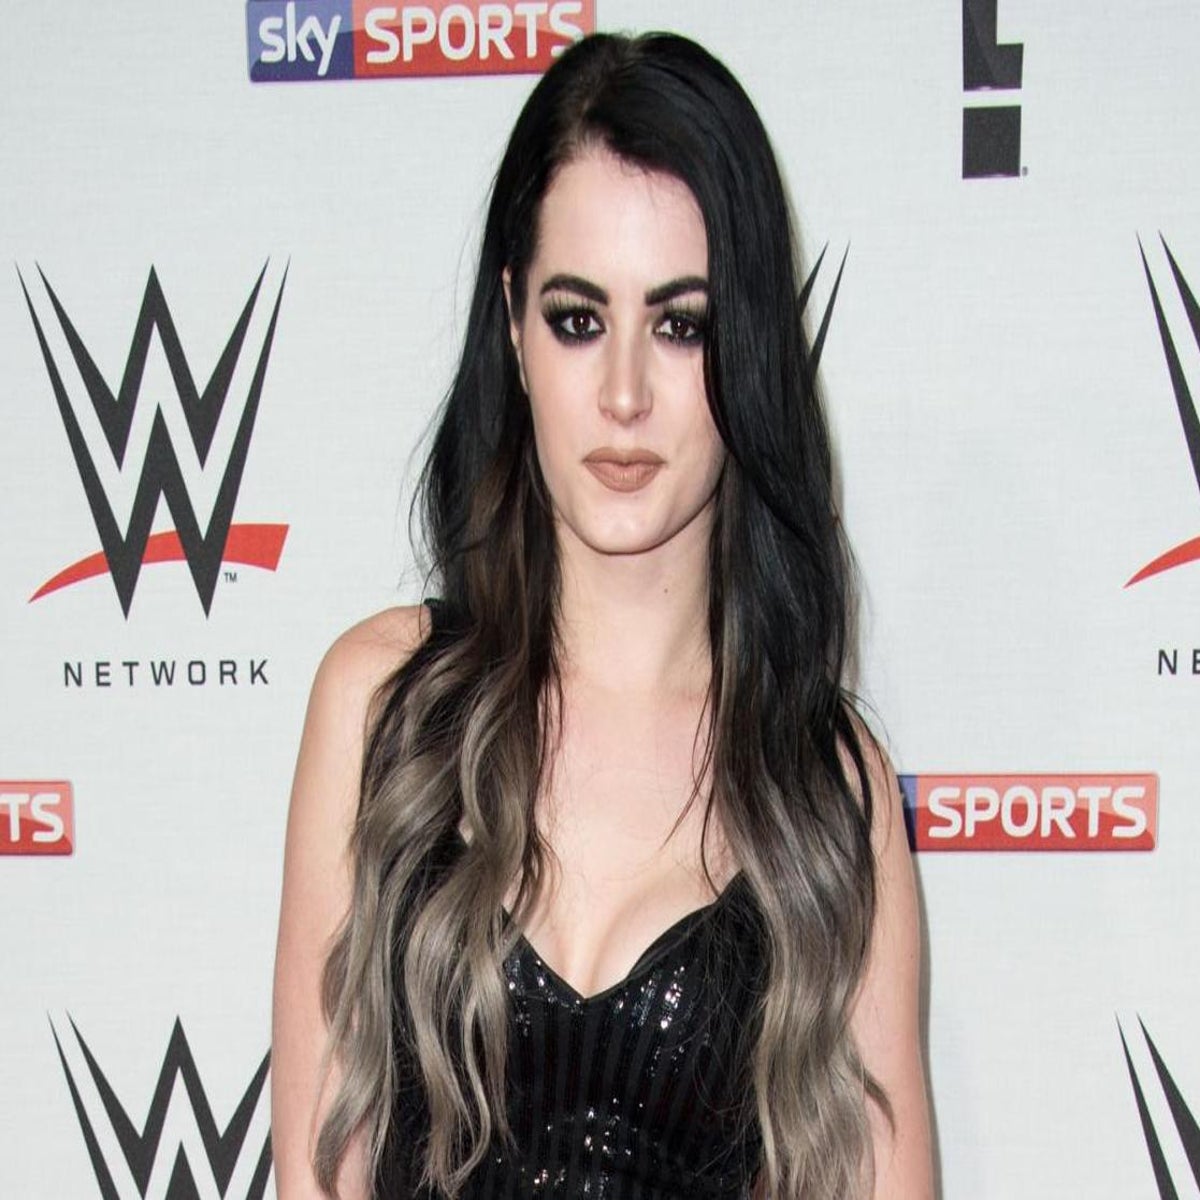 Wwe Me Sex - Paige sex tape leak caused WWE star to develop anorexia | The Independent